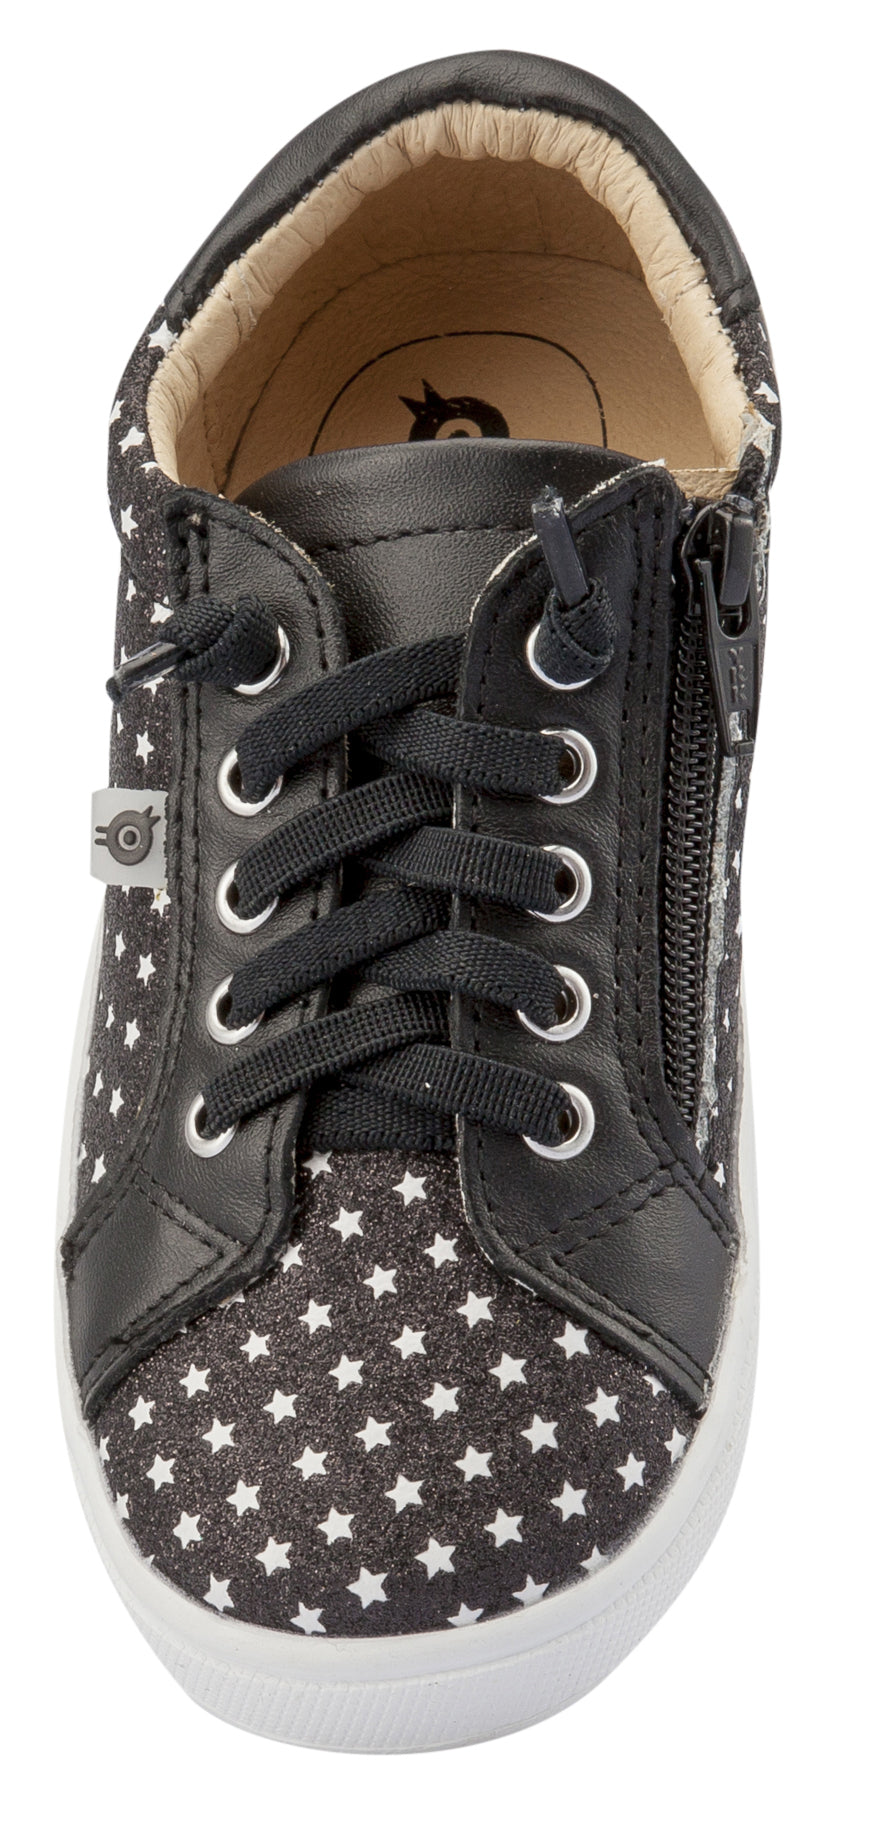 Old Soles Girl's & Boy's Star Jogger Sneakers, Star Glam Black